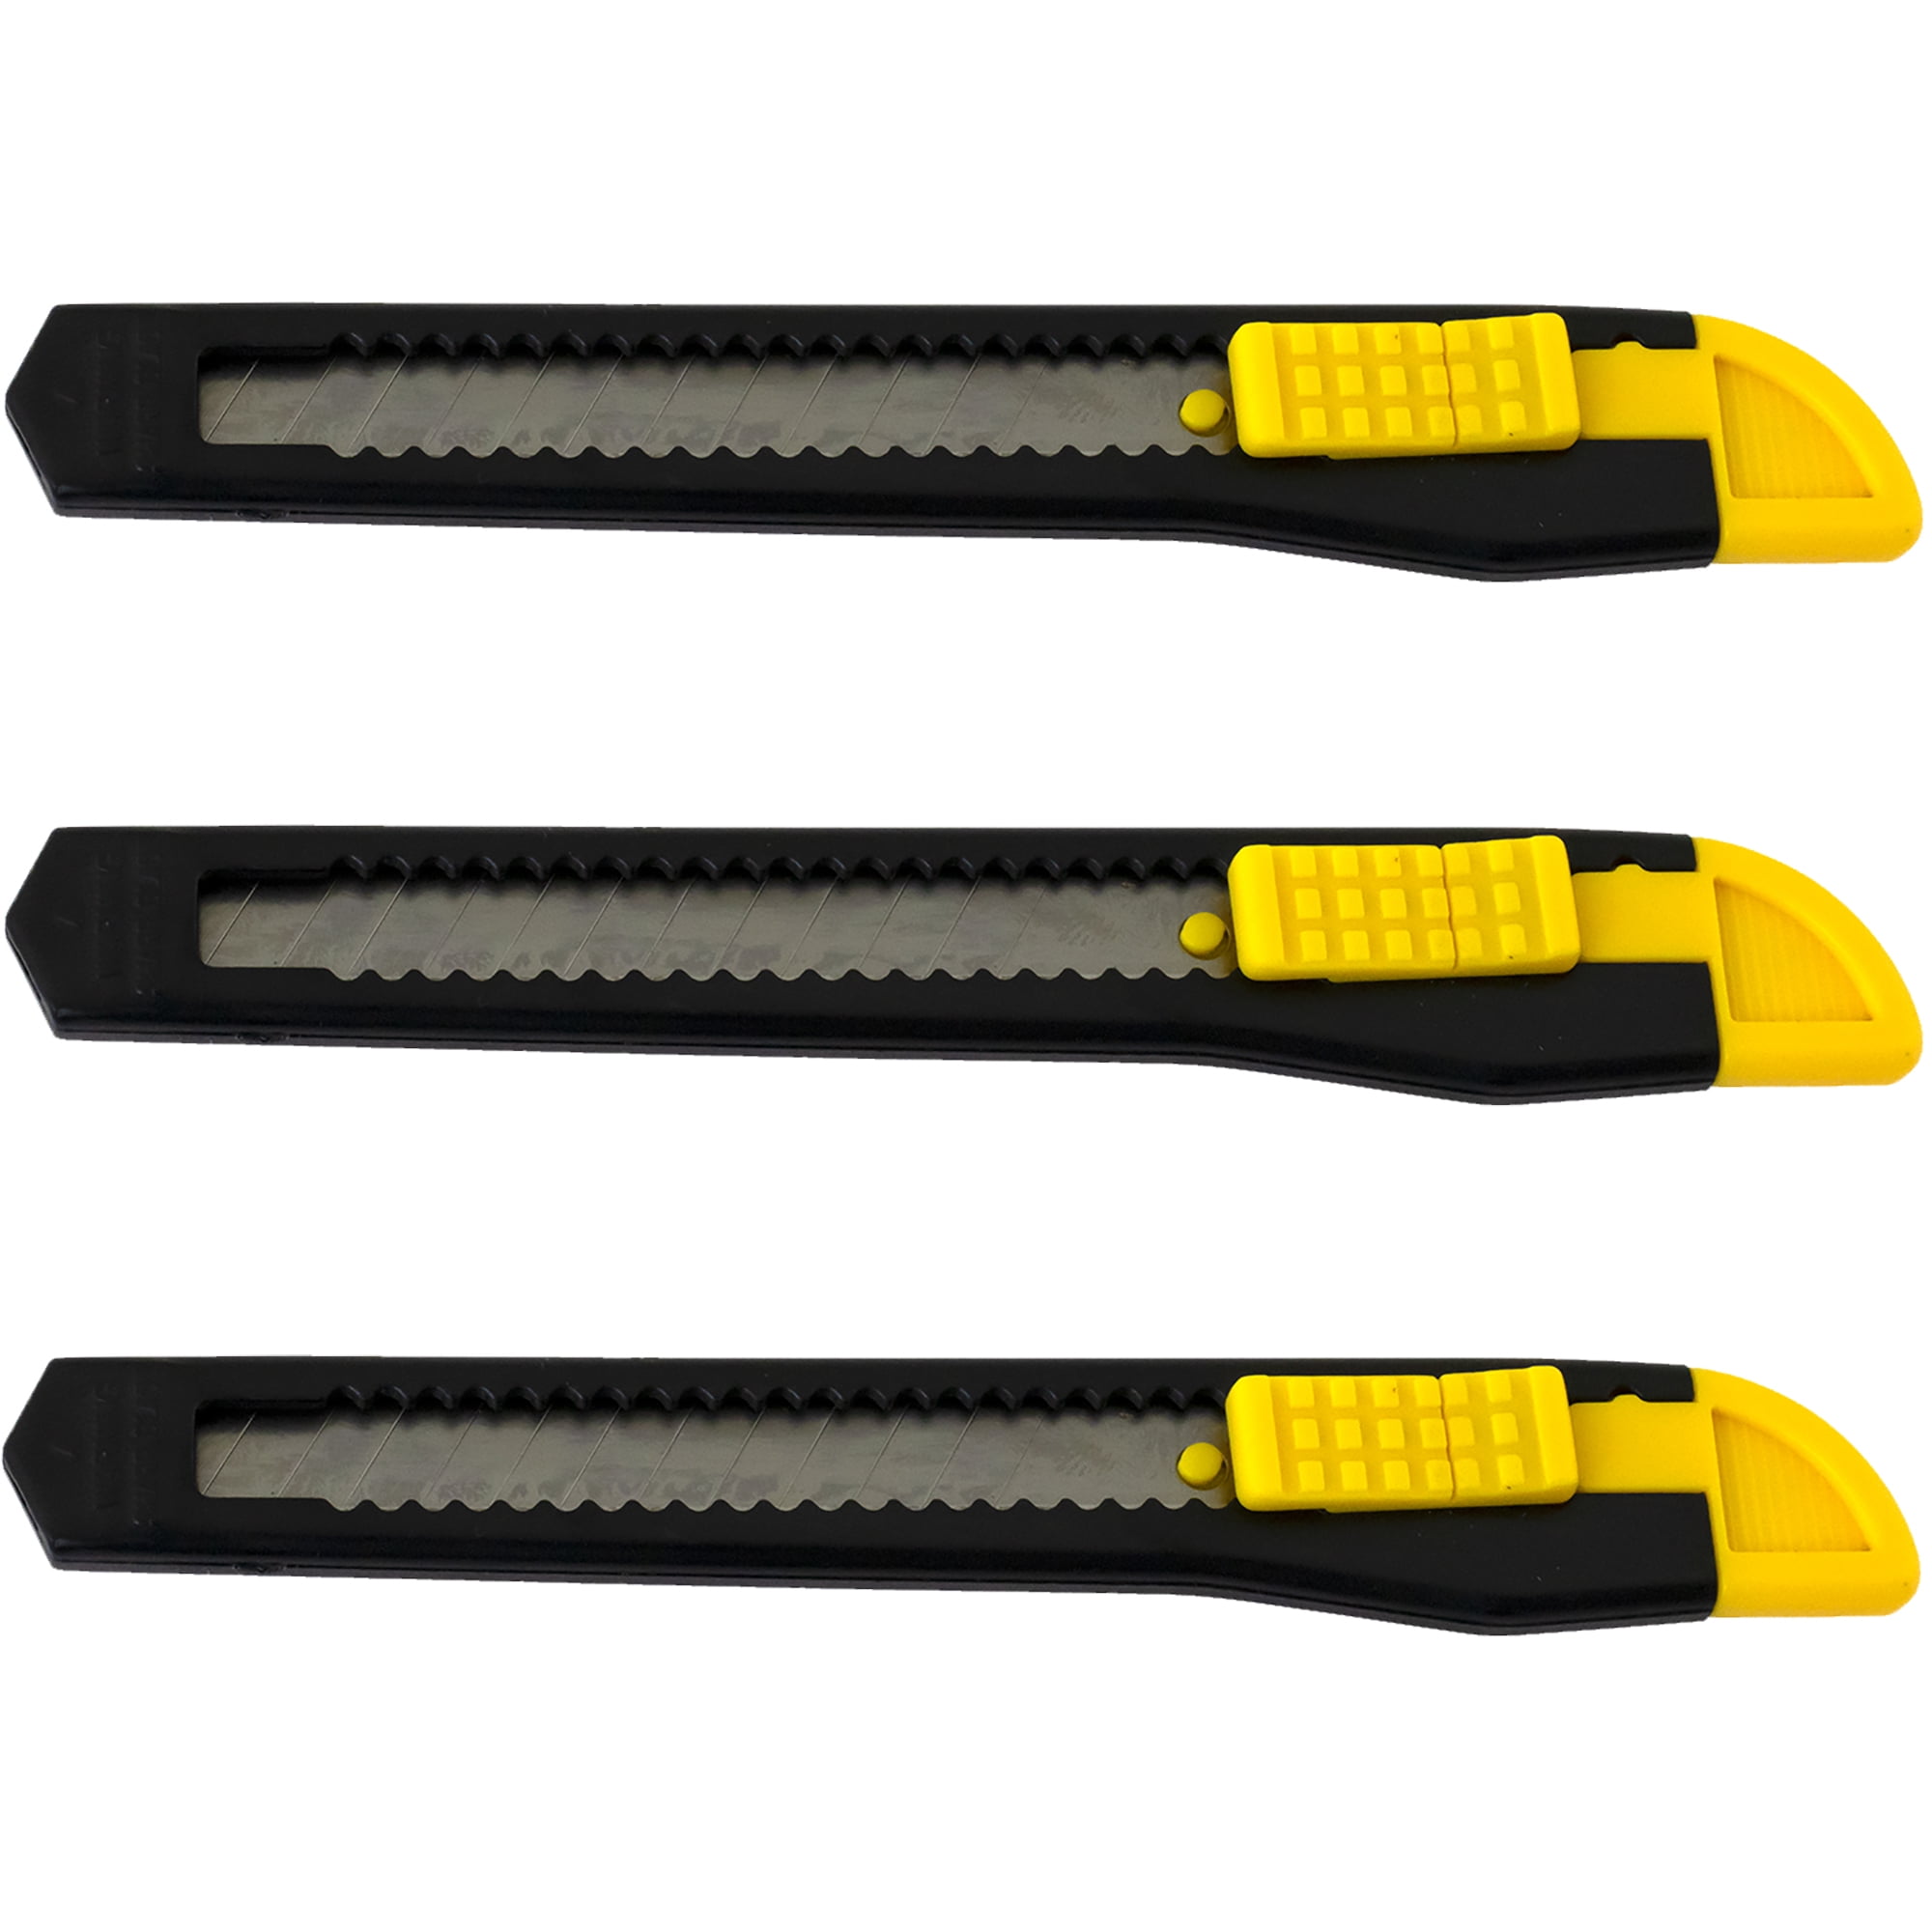 3-Pack Box Cutter Retractable, Utility Knife - 99 Rands